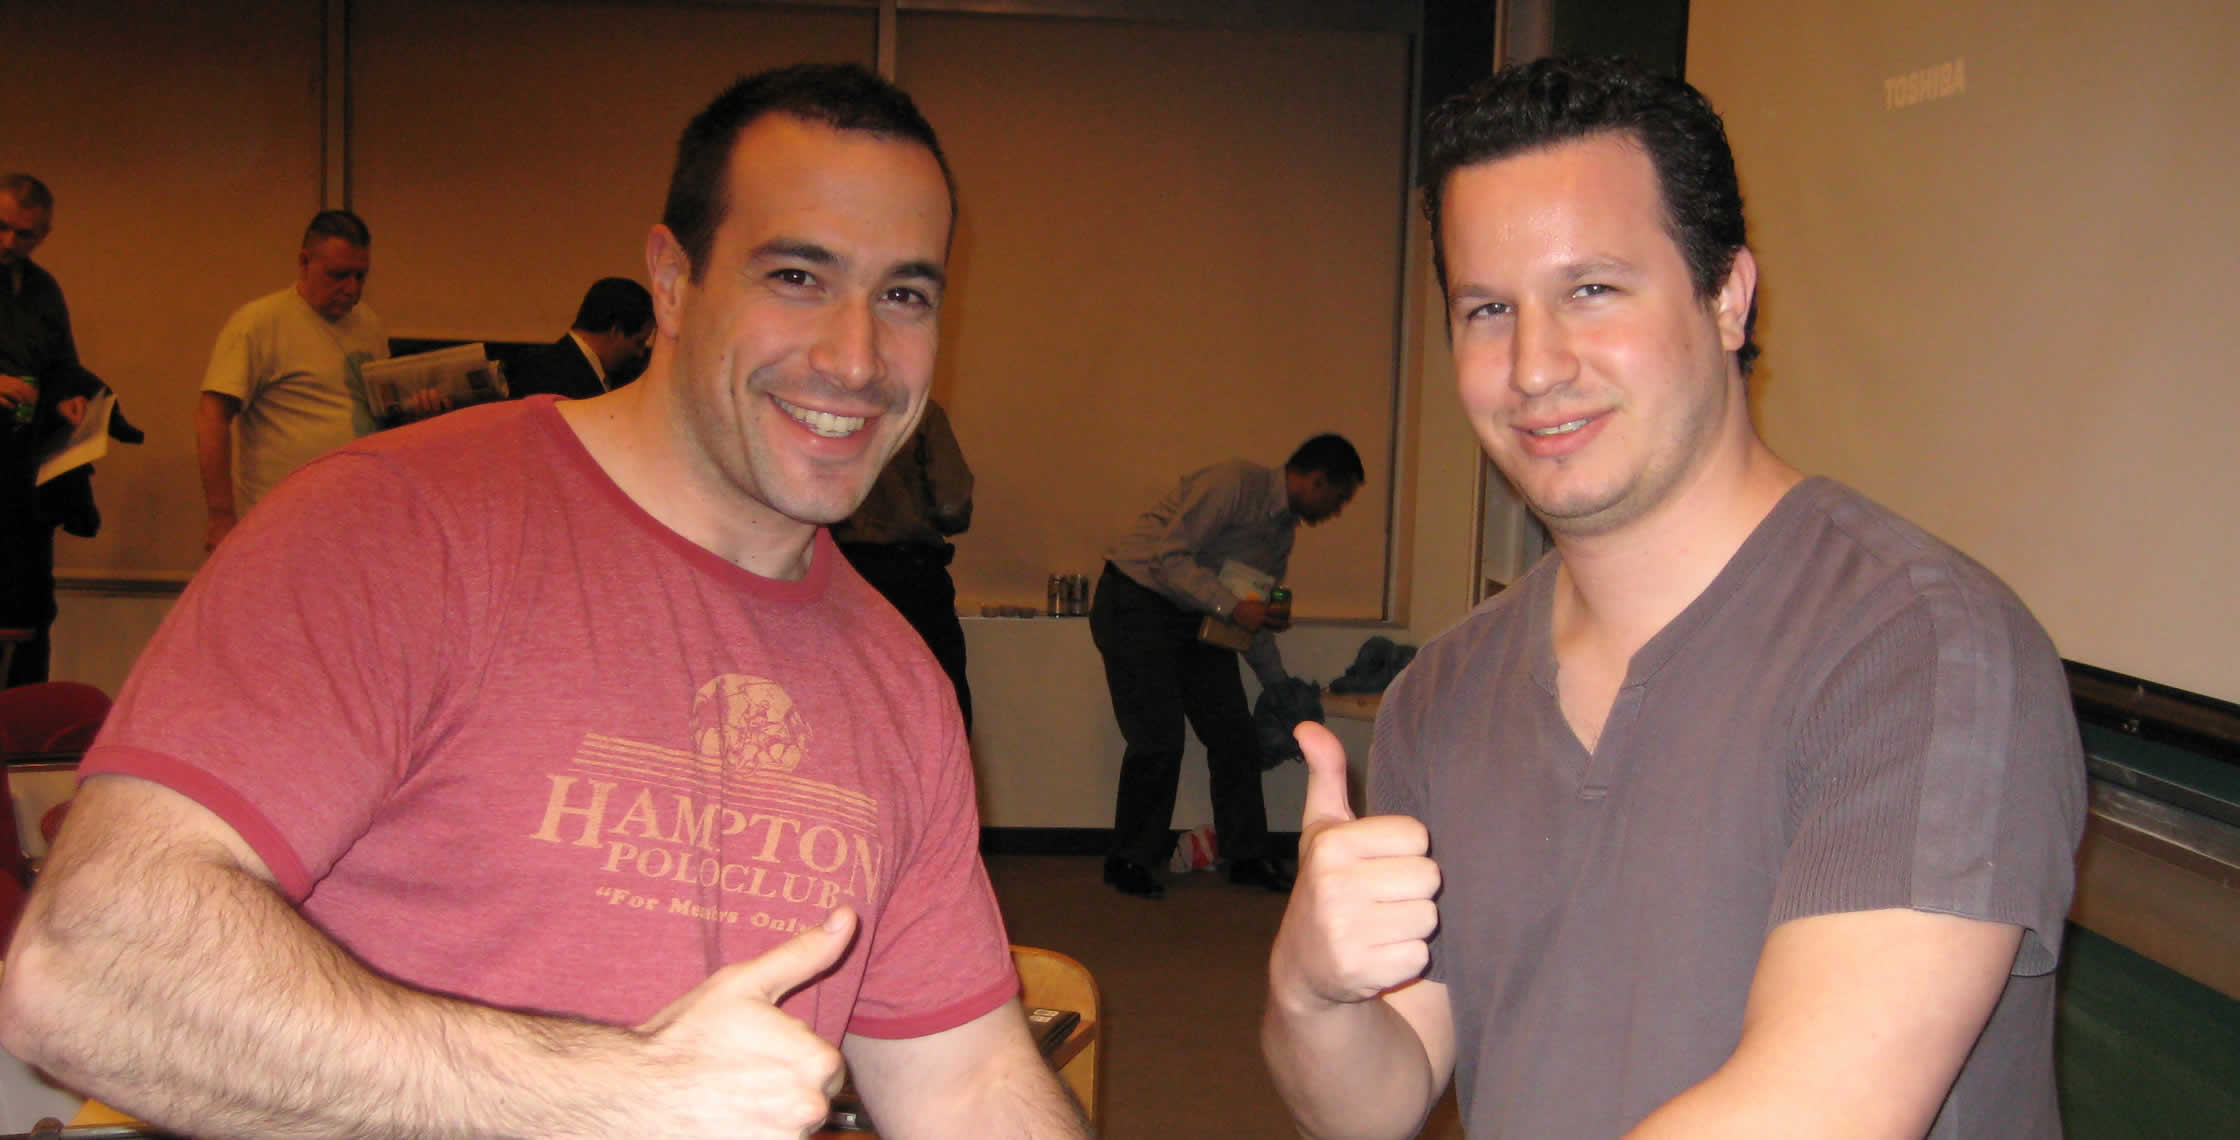 Ben Nadel at the New York ColdFusion User Group (Apr. 2008) with: Rob Gonda